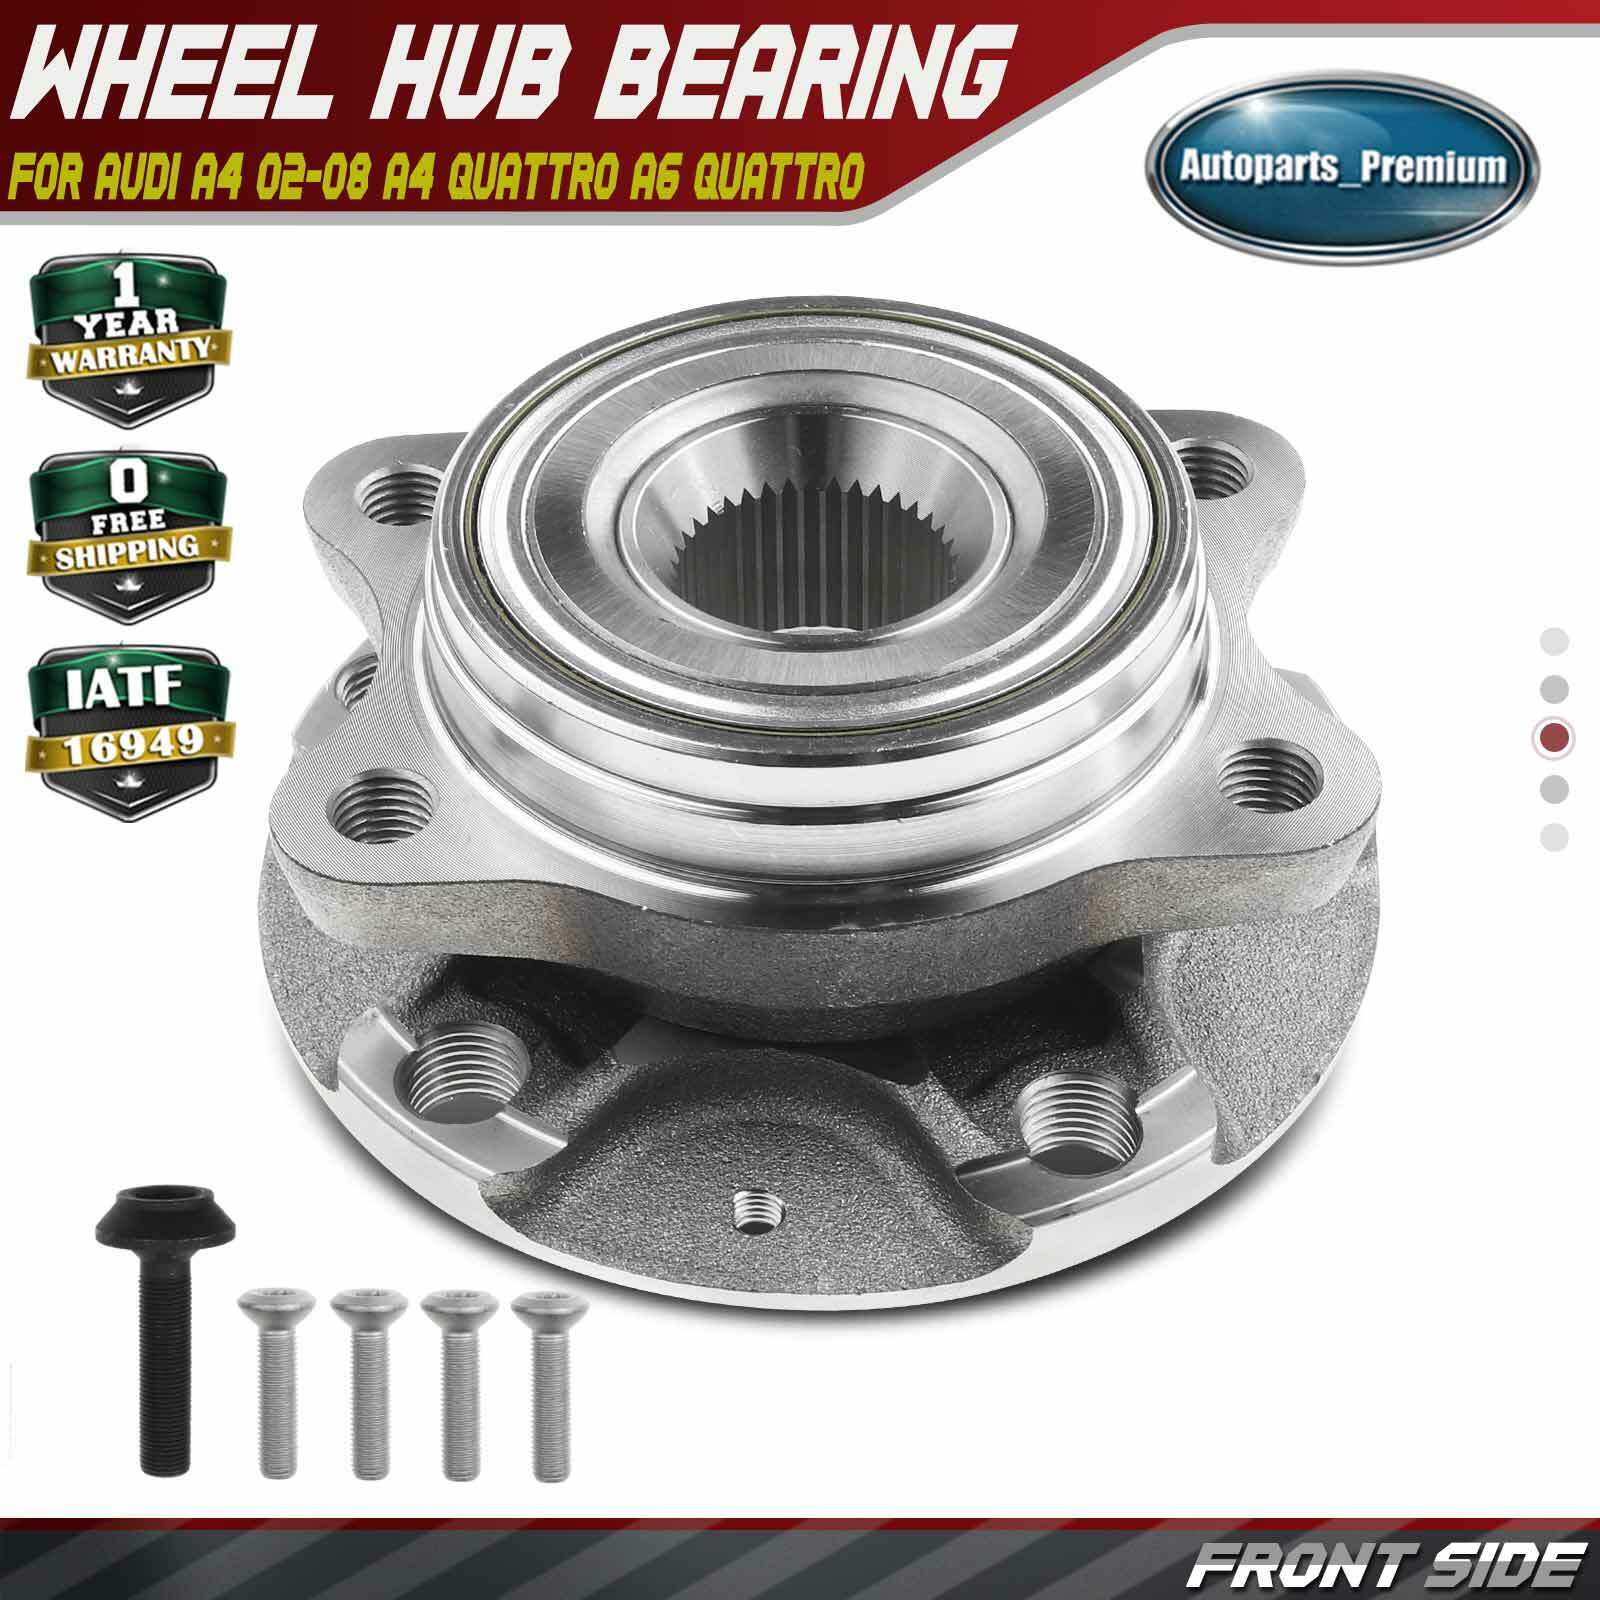 Front Side Wheel Hub Bearing Assembly for Audi A4 02-08 A4 Quattro A6 A6 Quattro